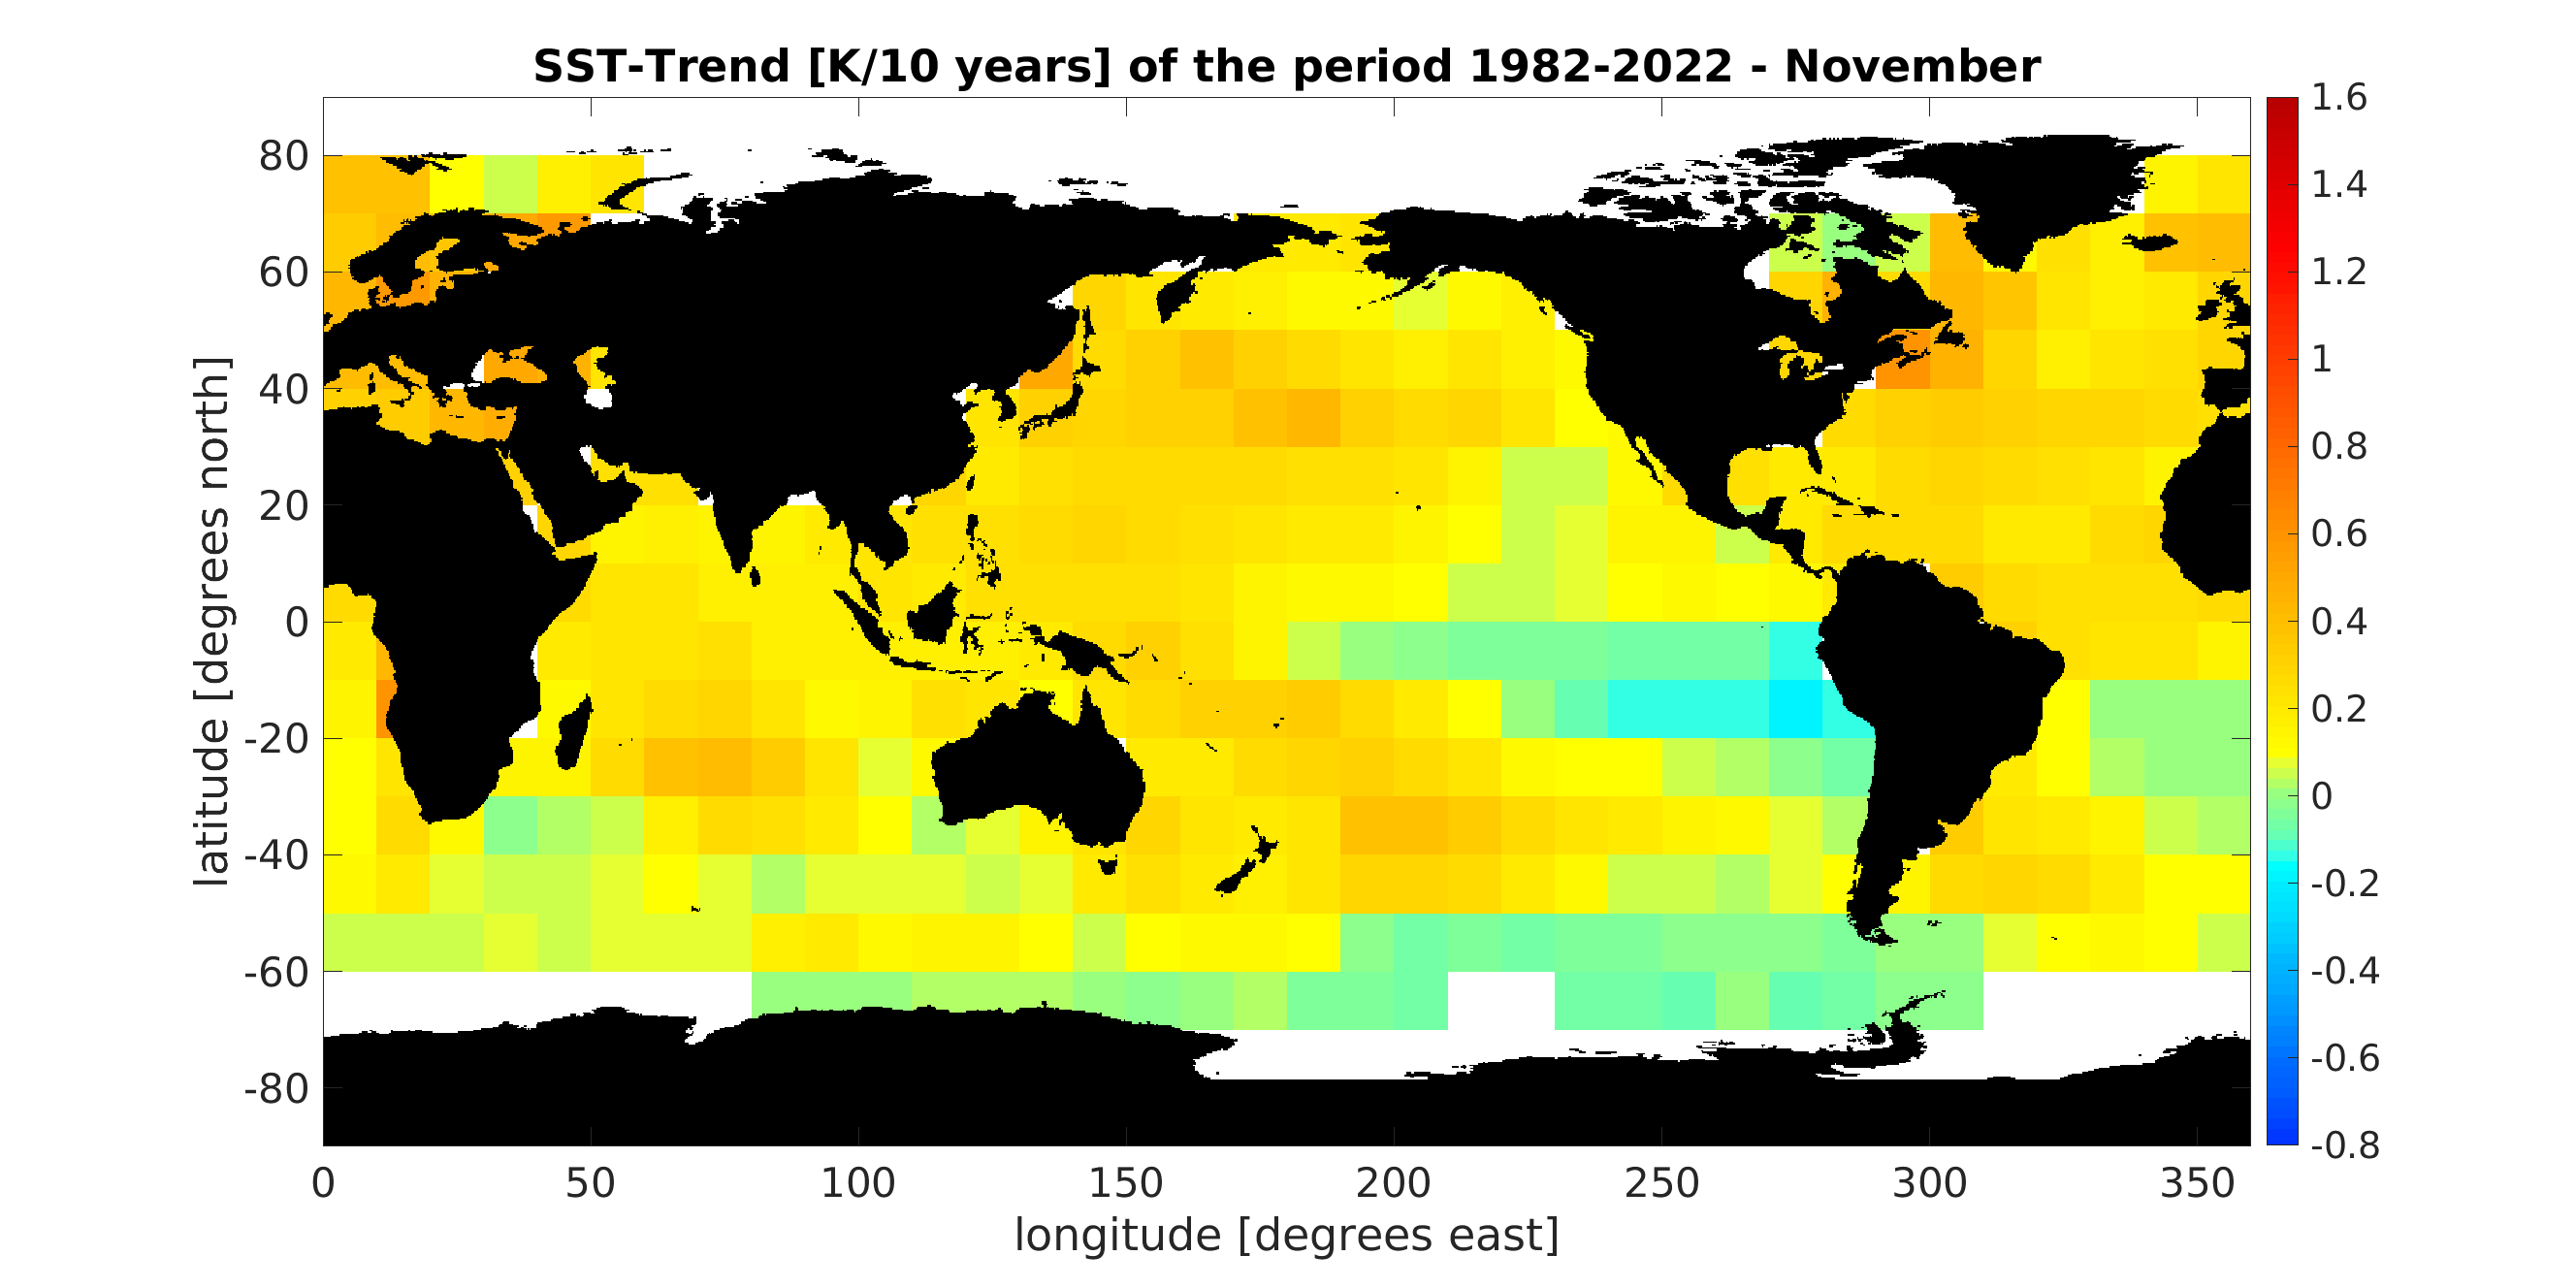 Maps of the SST trend for each month for the period 1982-2020 NOV